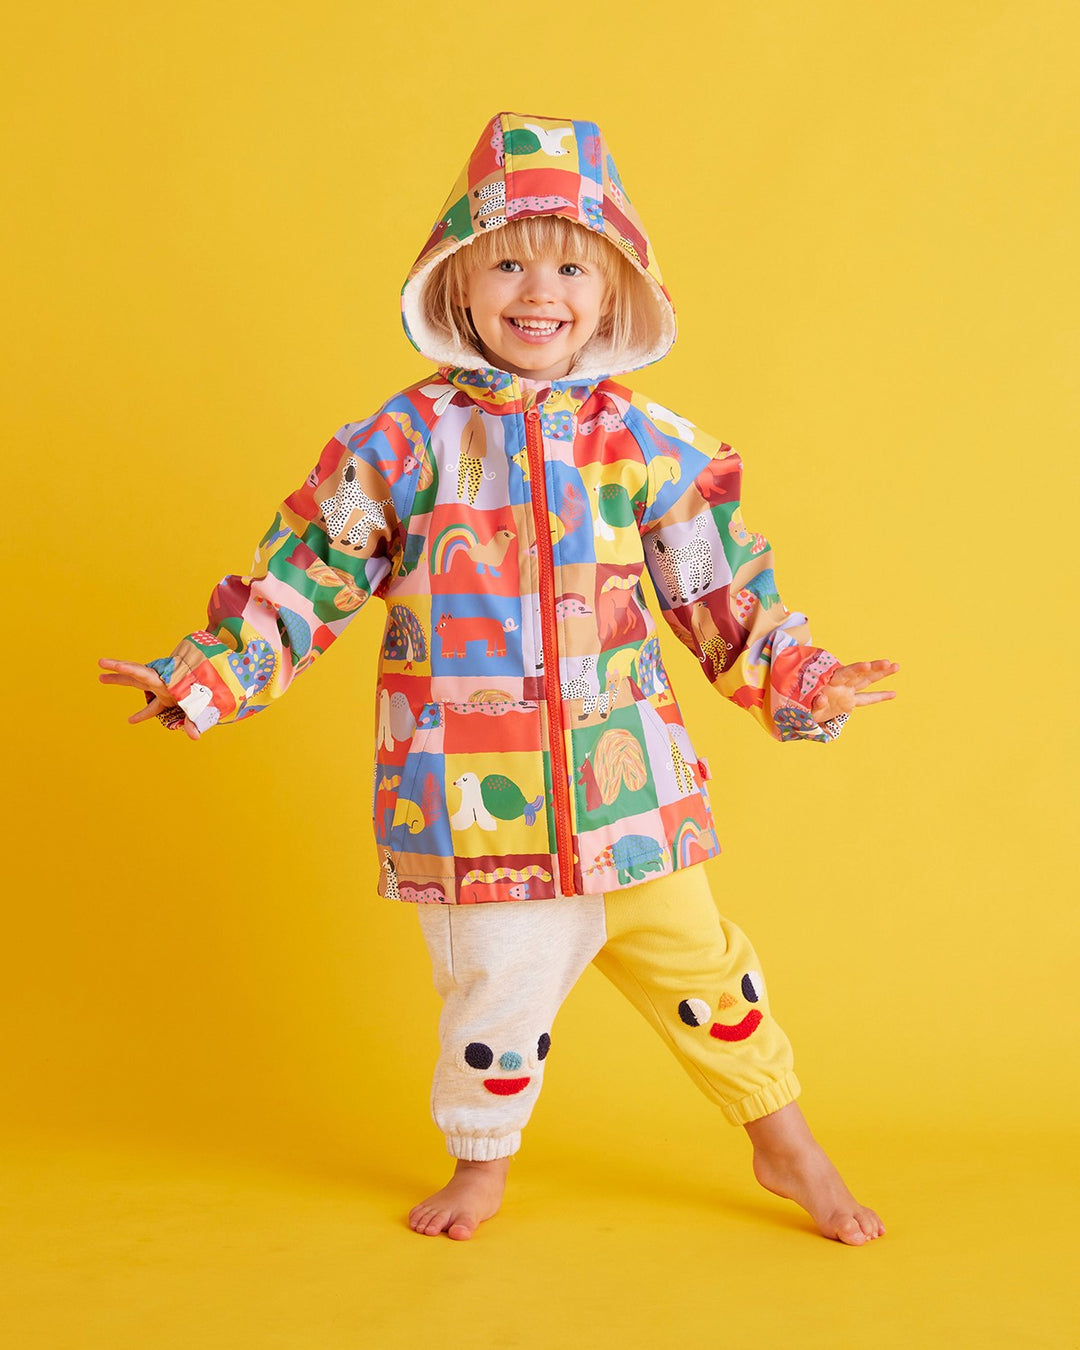 Halcyon Nights Kids Rain Jacket - Look At Our Tails